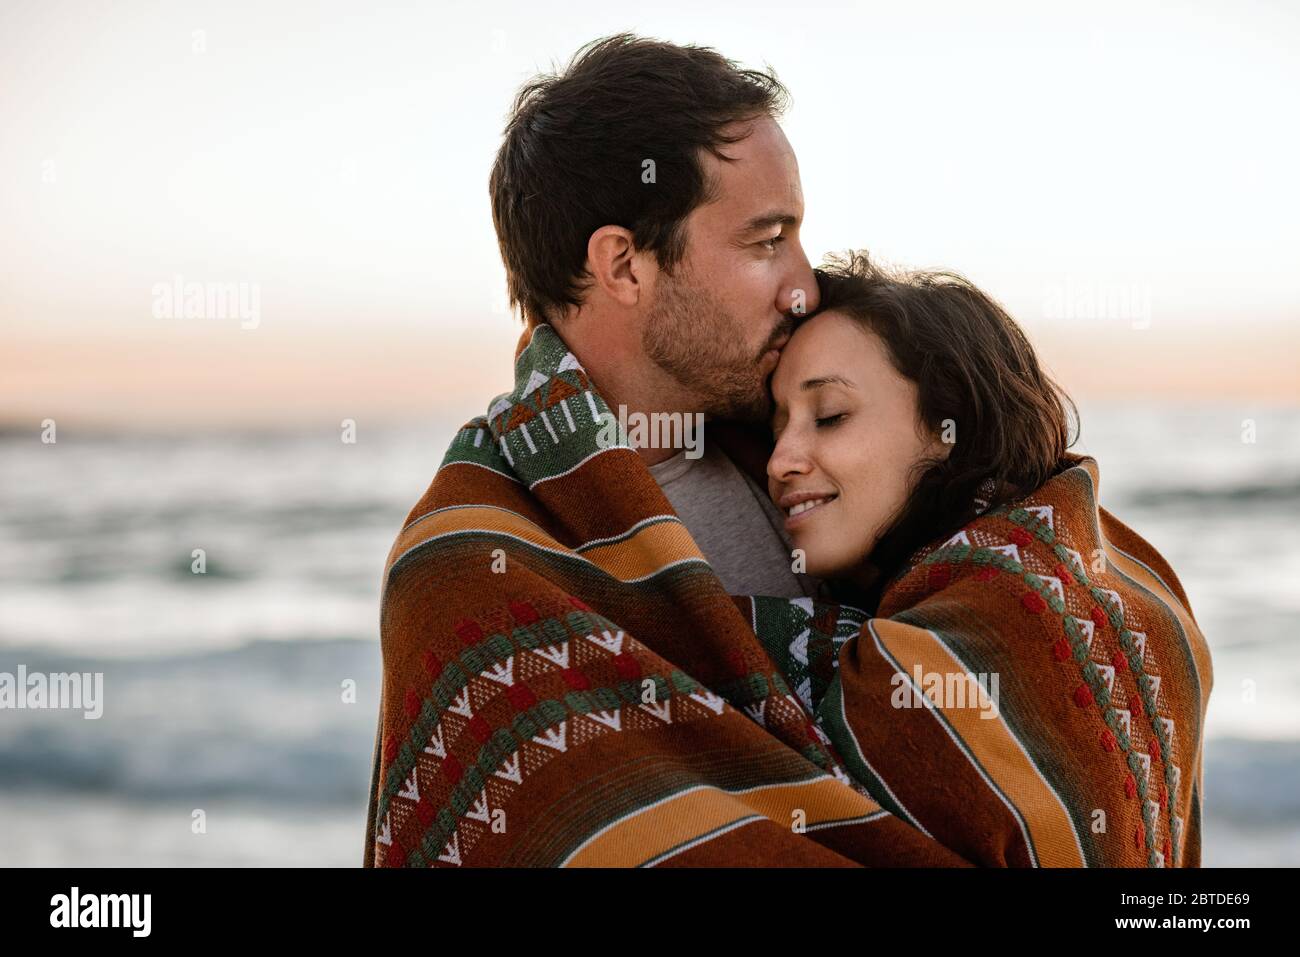 Loving couple standing on a beach wrapped in a blanket Stock Photo